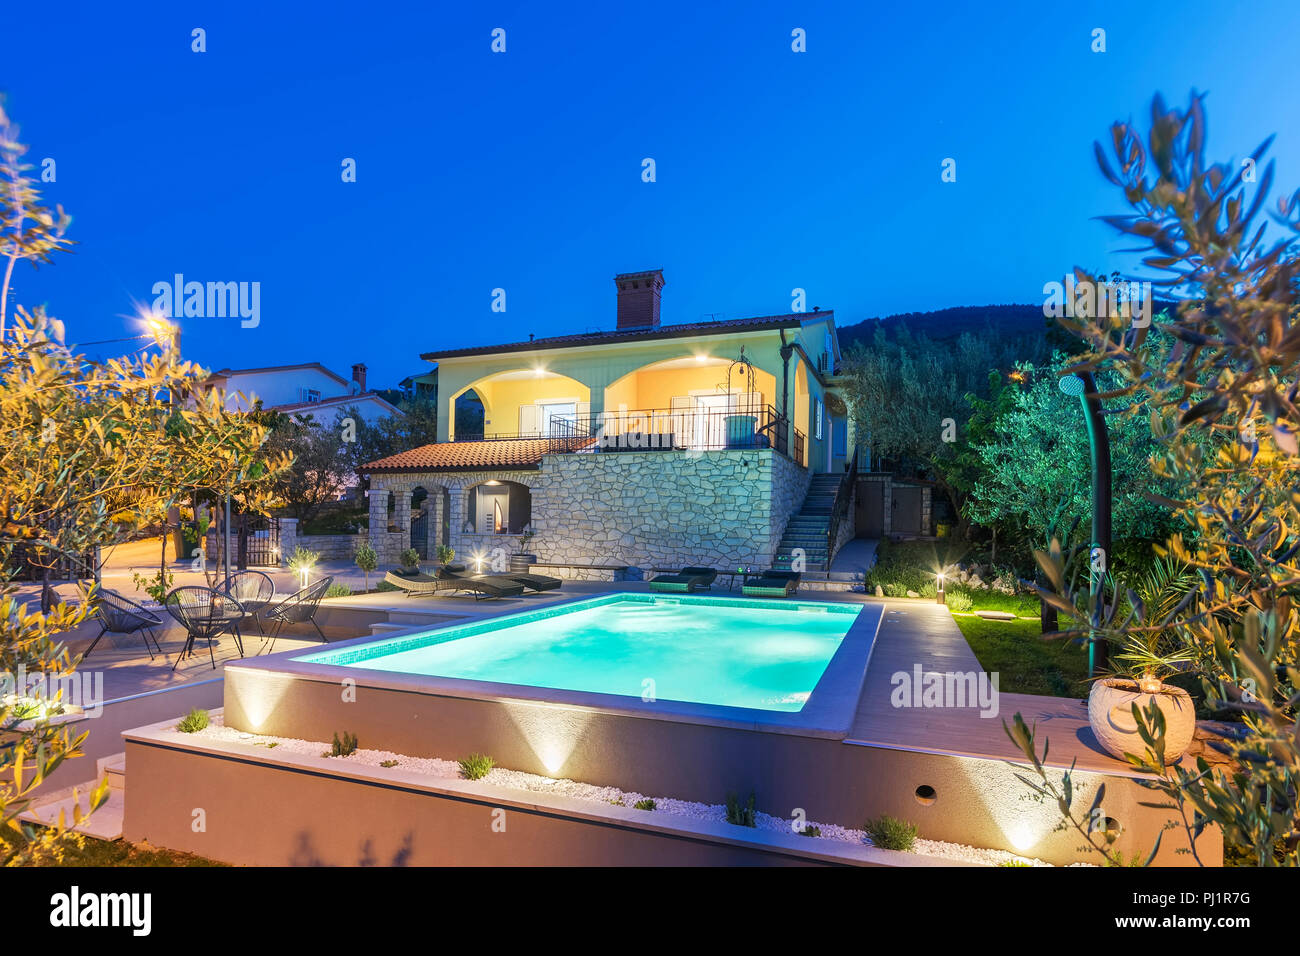 holiday home with swimming pool at night Stock Photo